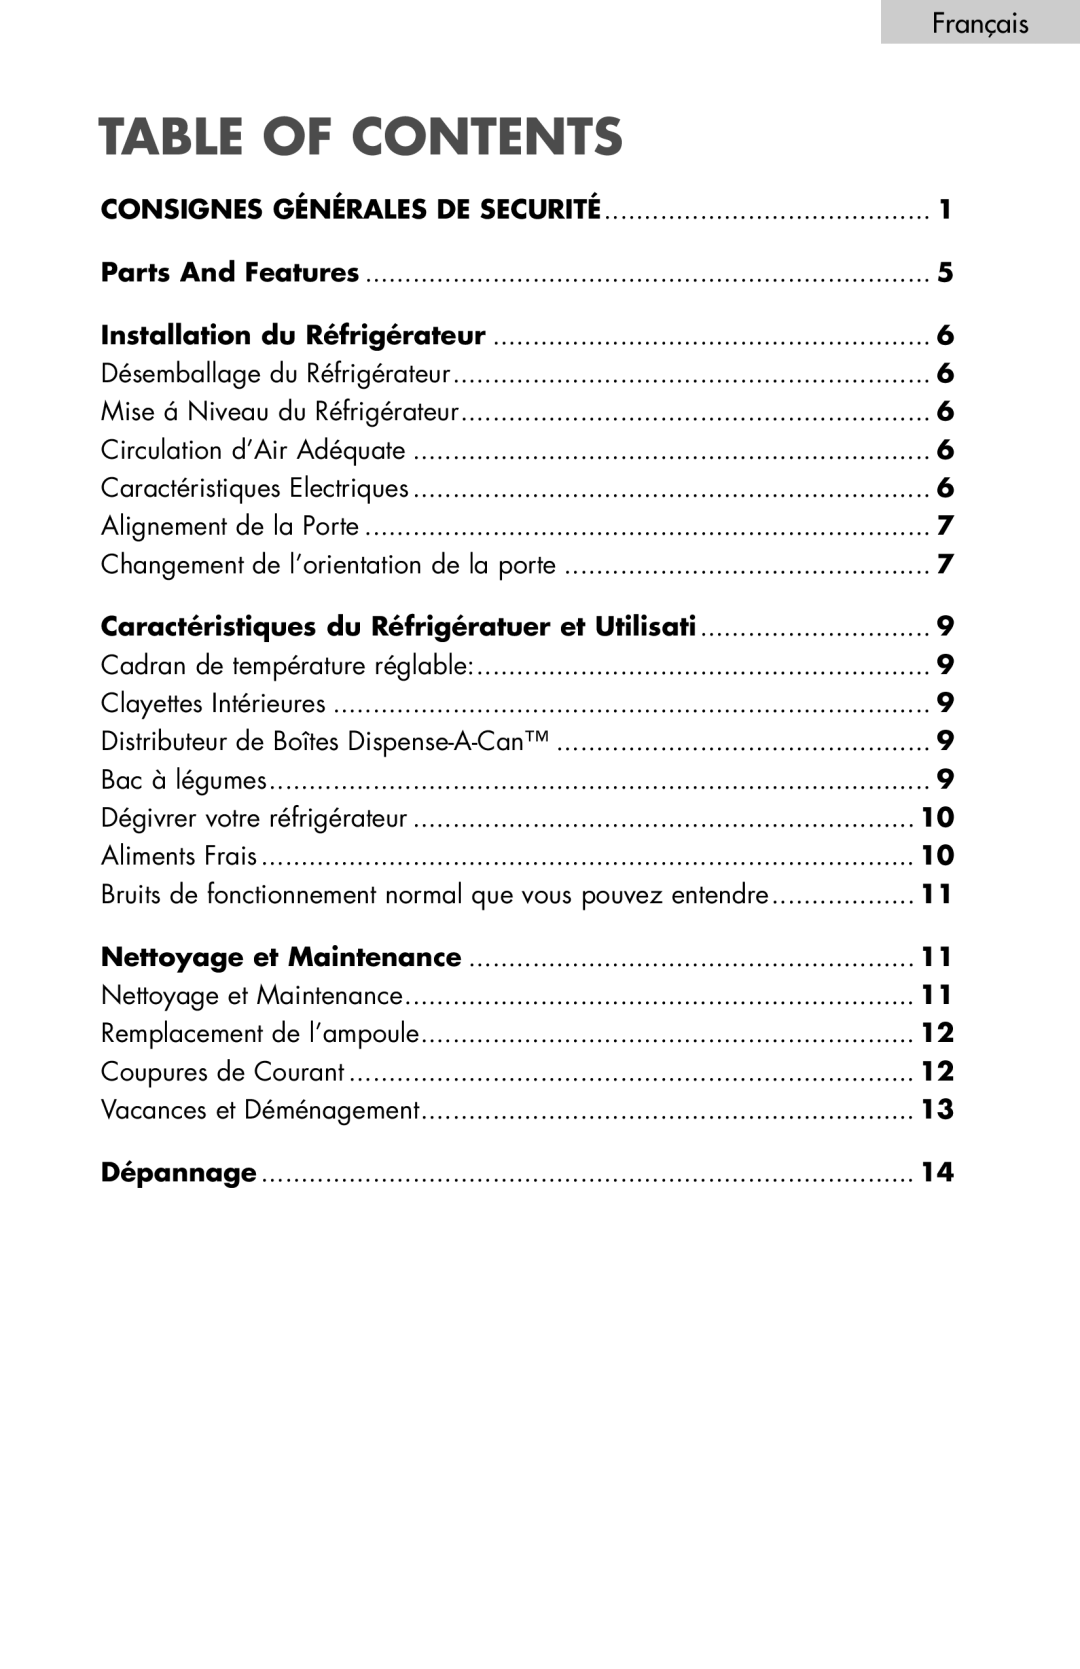 Igloo FR832, FR834B user manual Français, table of contents 